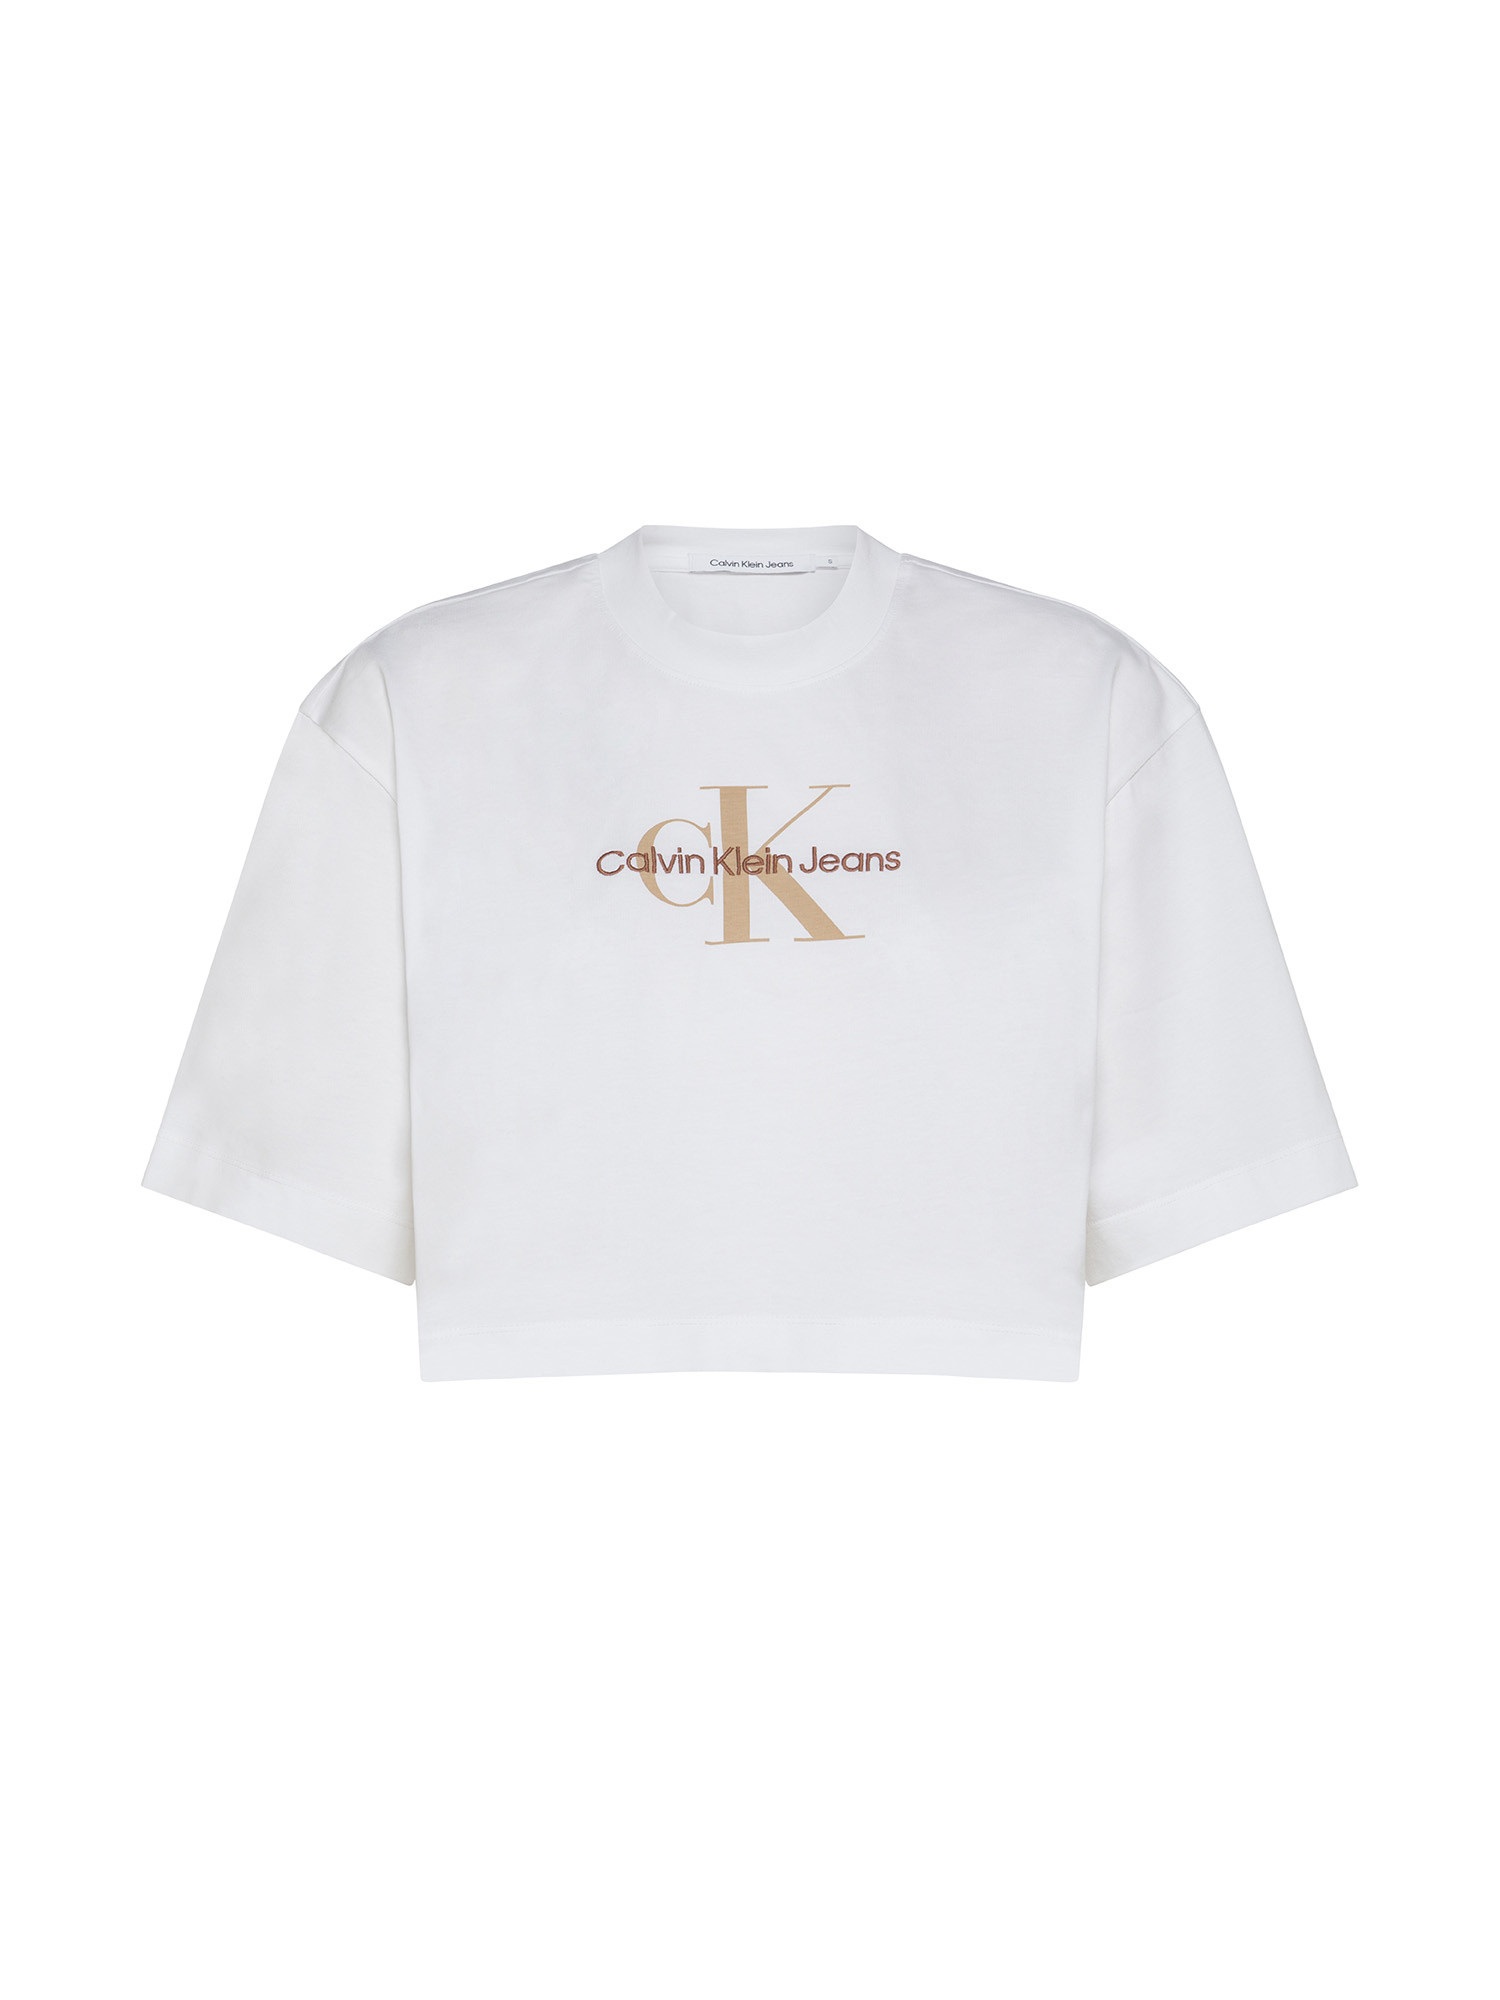 Calvin Klein Jeans - Cotton cropped T-shirt with logo, White, large image number 0